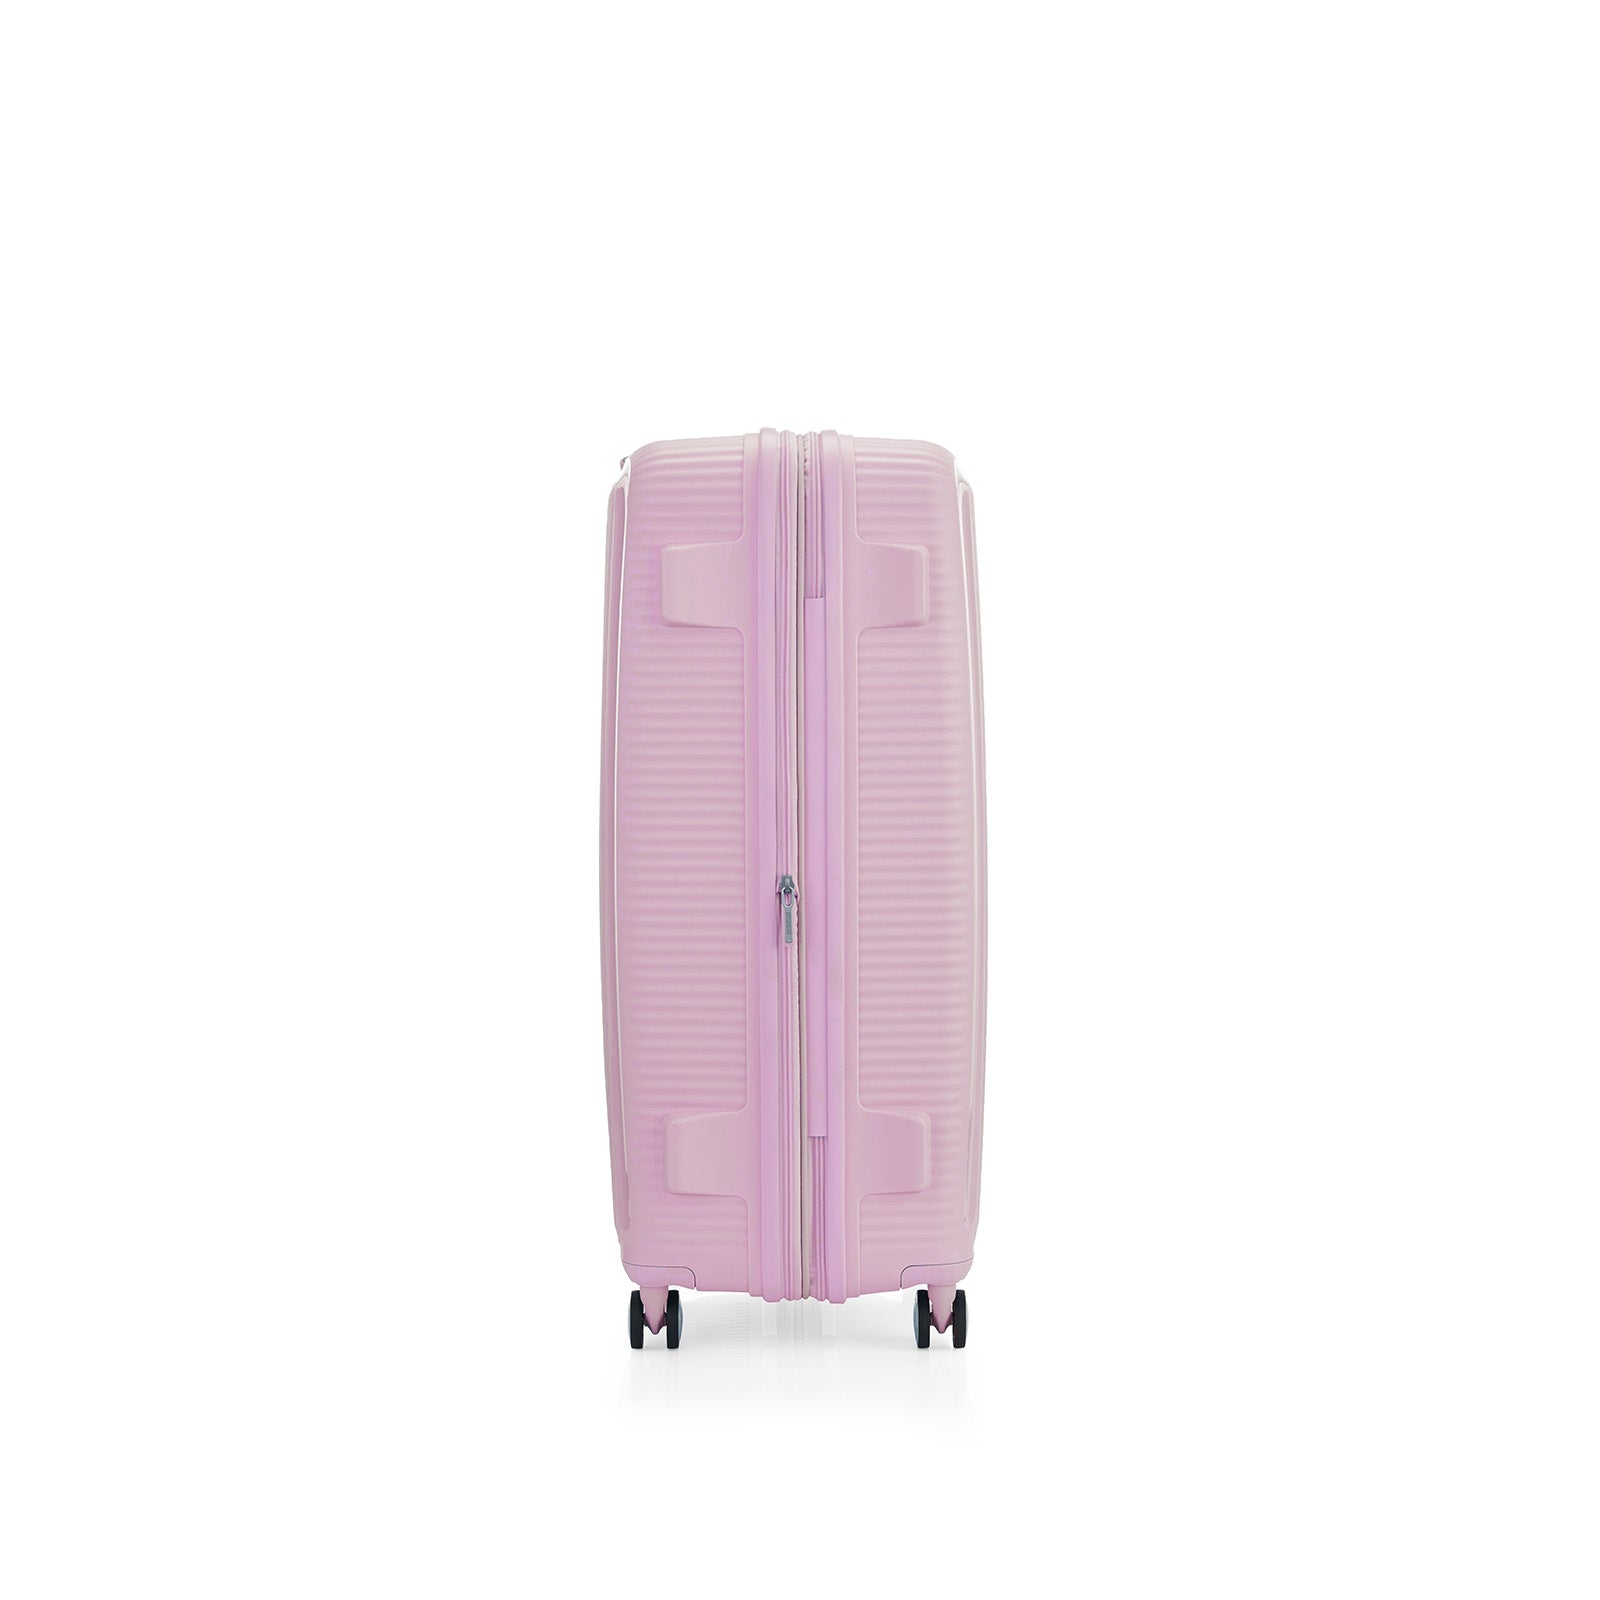 American-Tourister-Curio-2-80cm-Suitcase-Fresh-Pink-Side